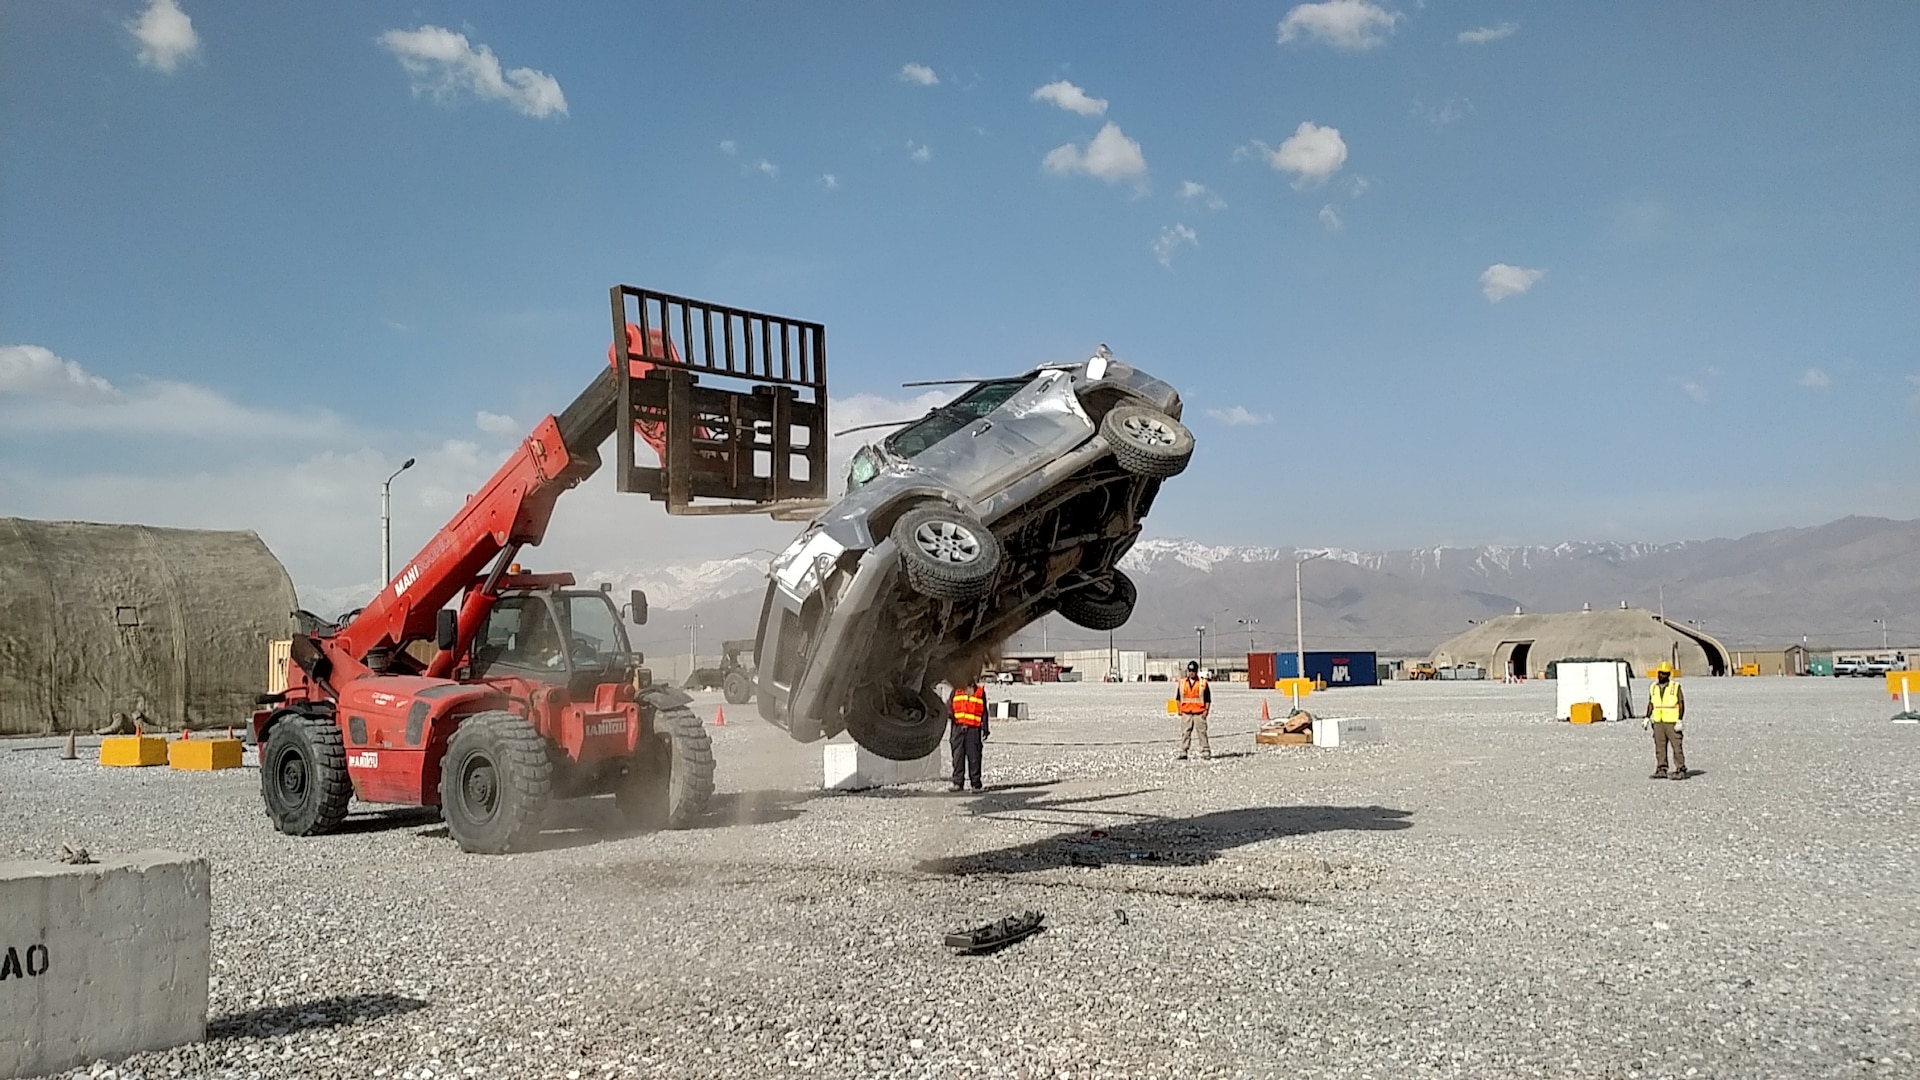 Personnel use a large forklift to lift a vehicle and let it roll after being dropped to shake loose any ammunition that may have been left behind in the vehicles before any unfired rounds can cause an accident during disposal.